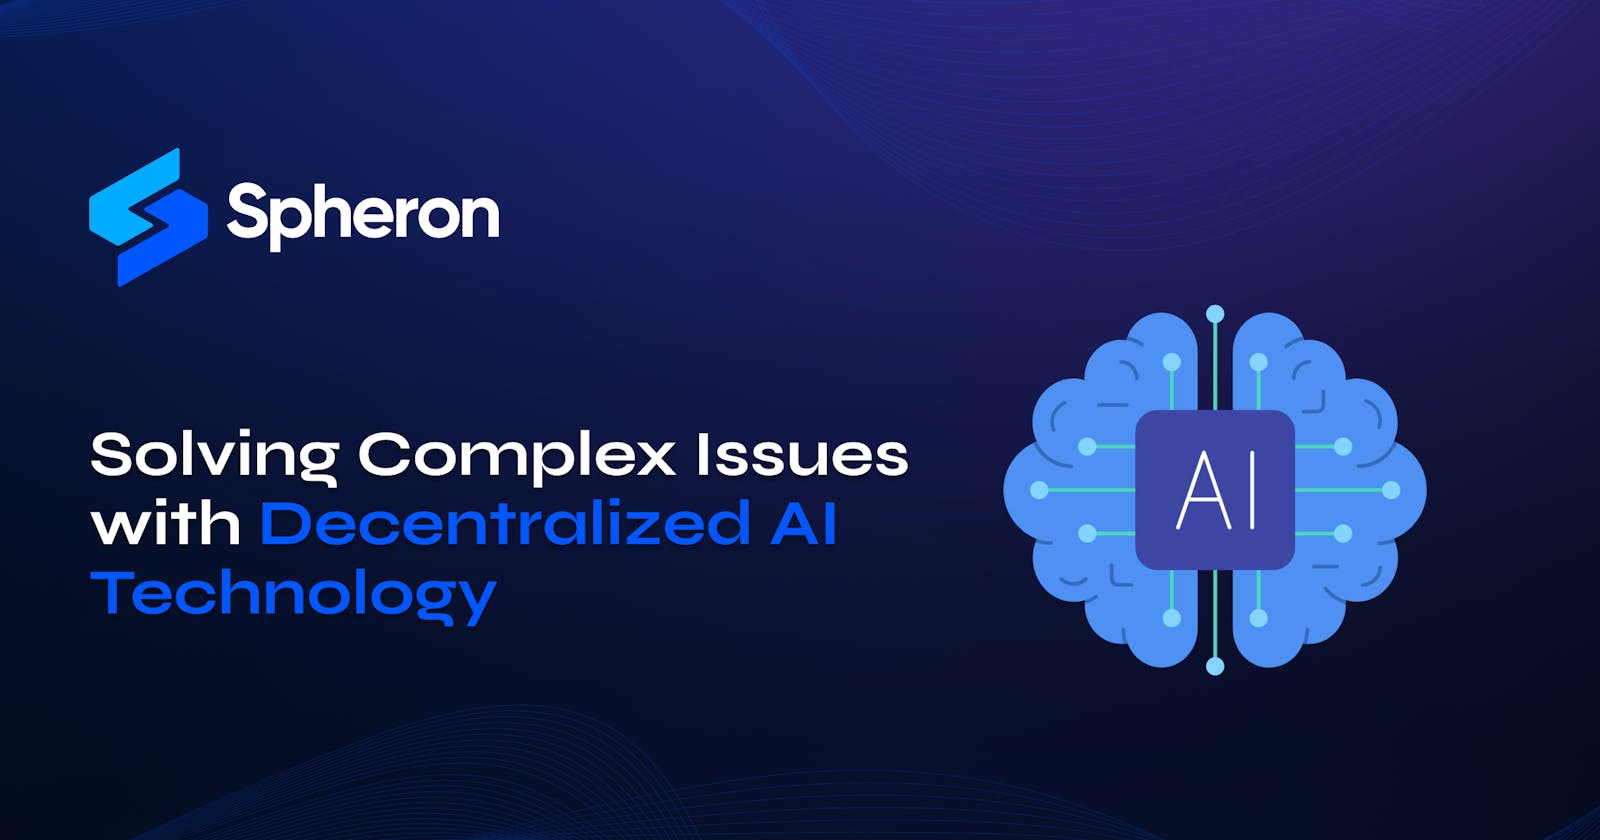 Solving Complex Issues with Decentralized AI Technology